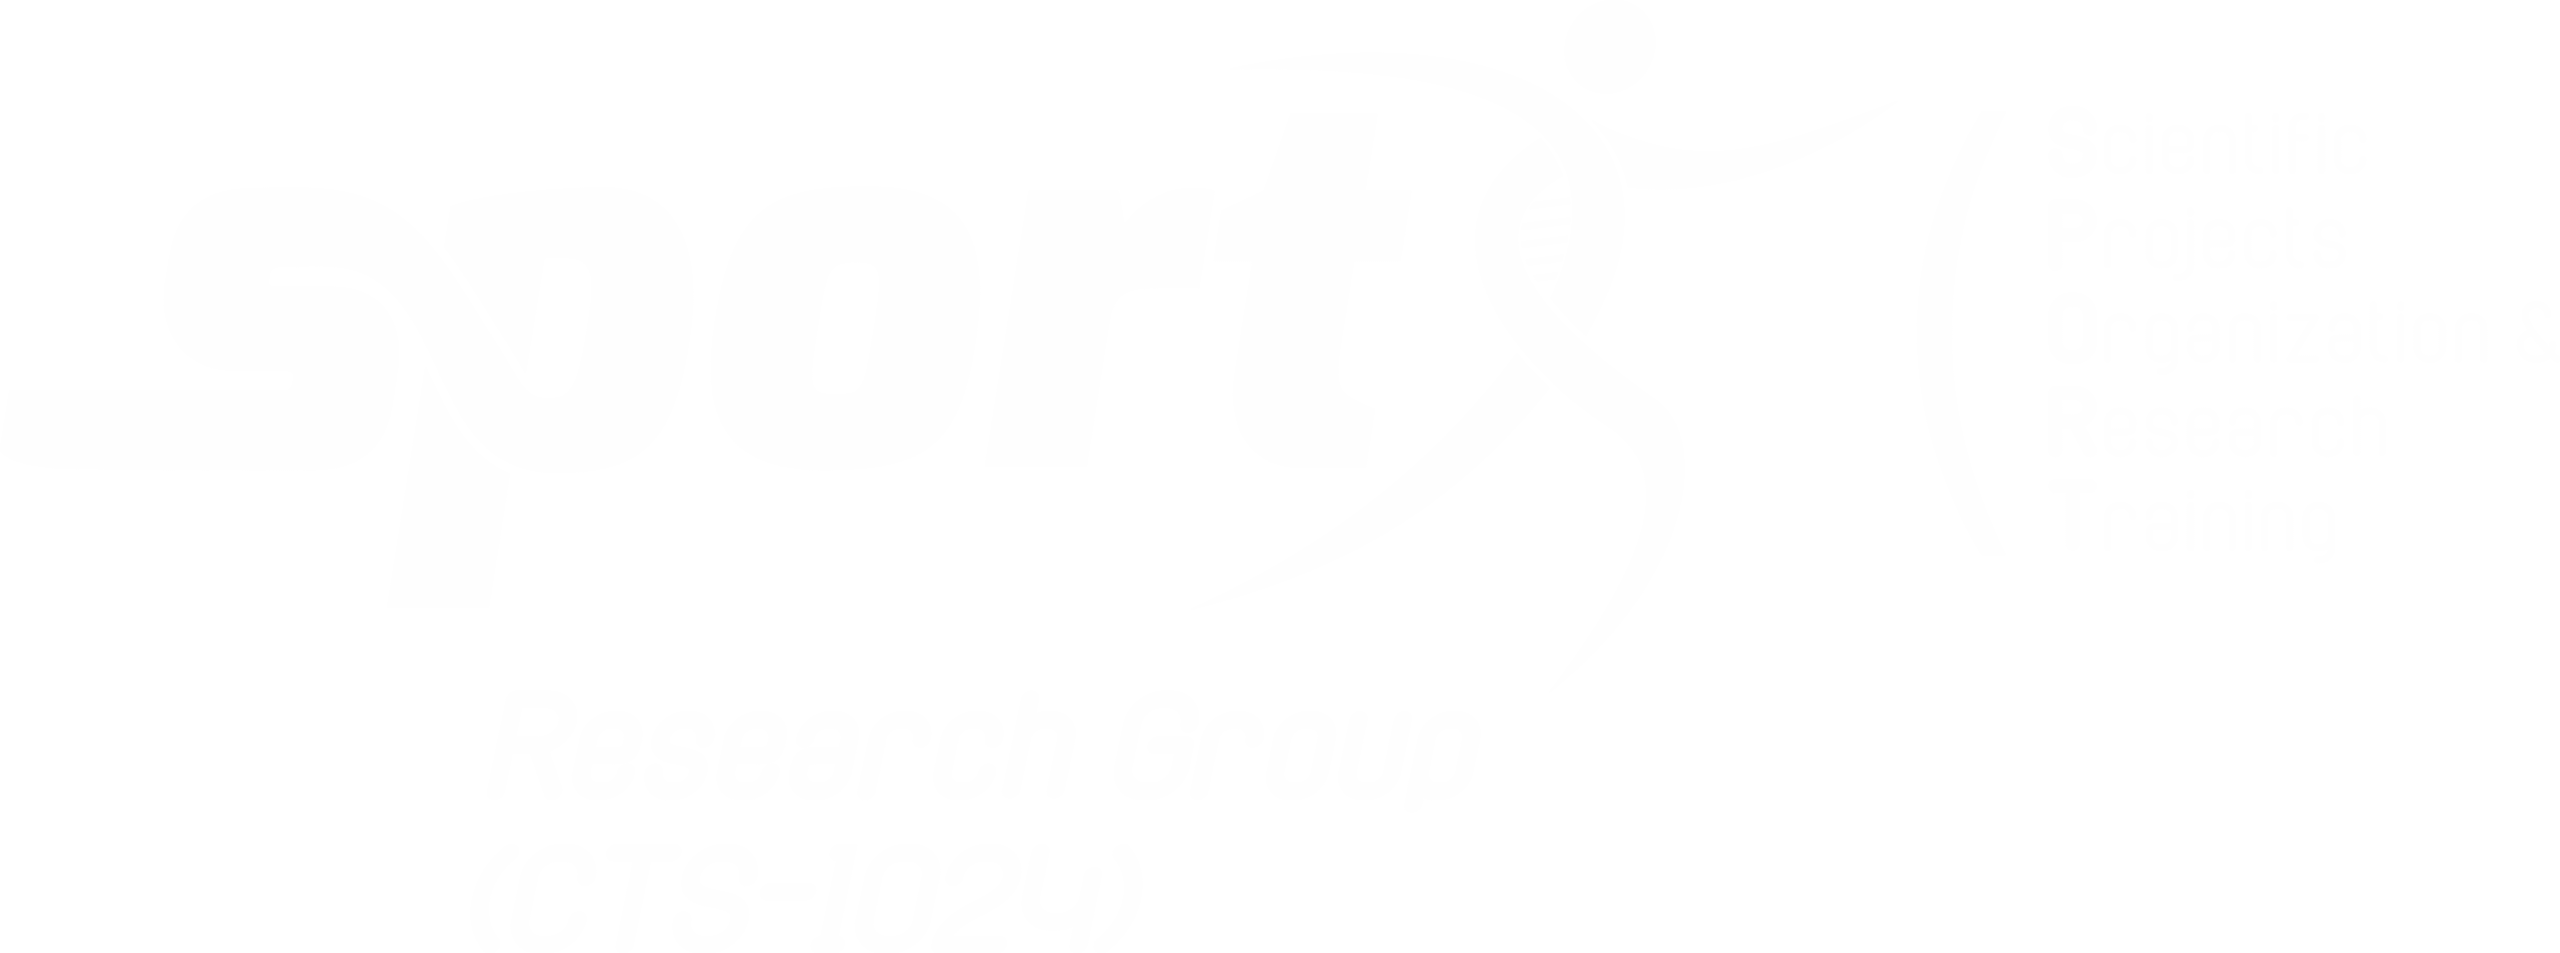 https://www.sportresearchgroup.es/wp-content/uploads/2022/05/SPORT-Research-Group-blanco.png